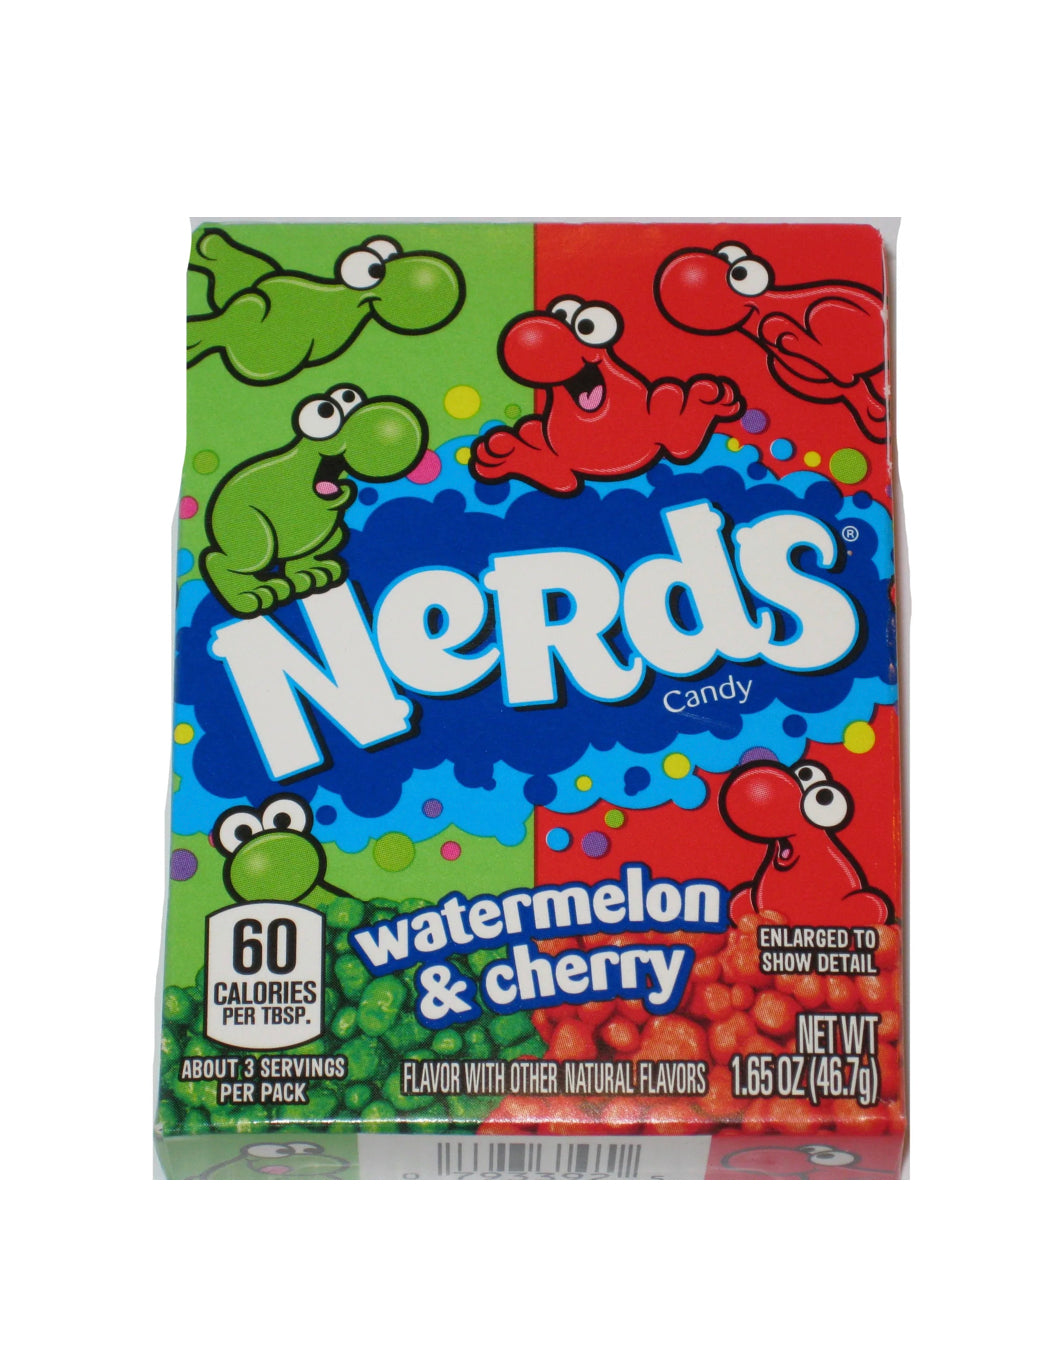 Nerds Watermelon and Cherry 1.65oz pack